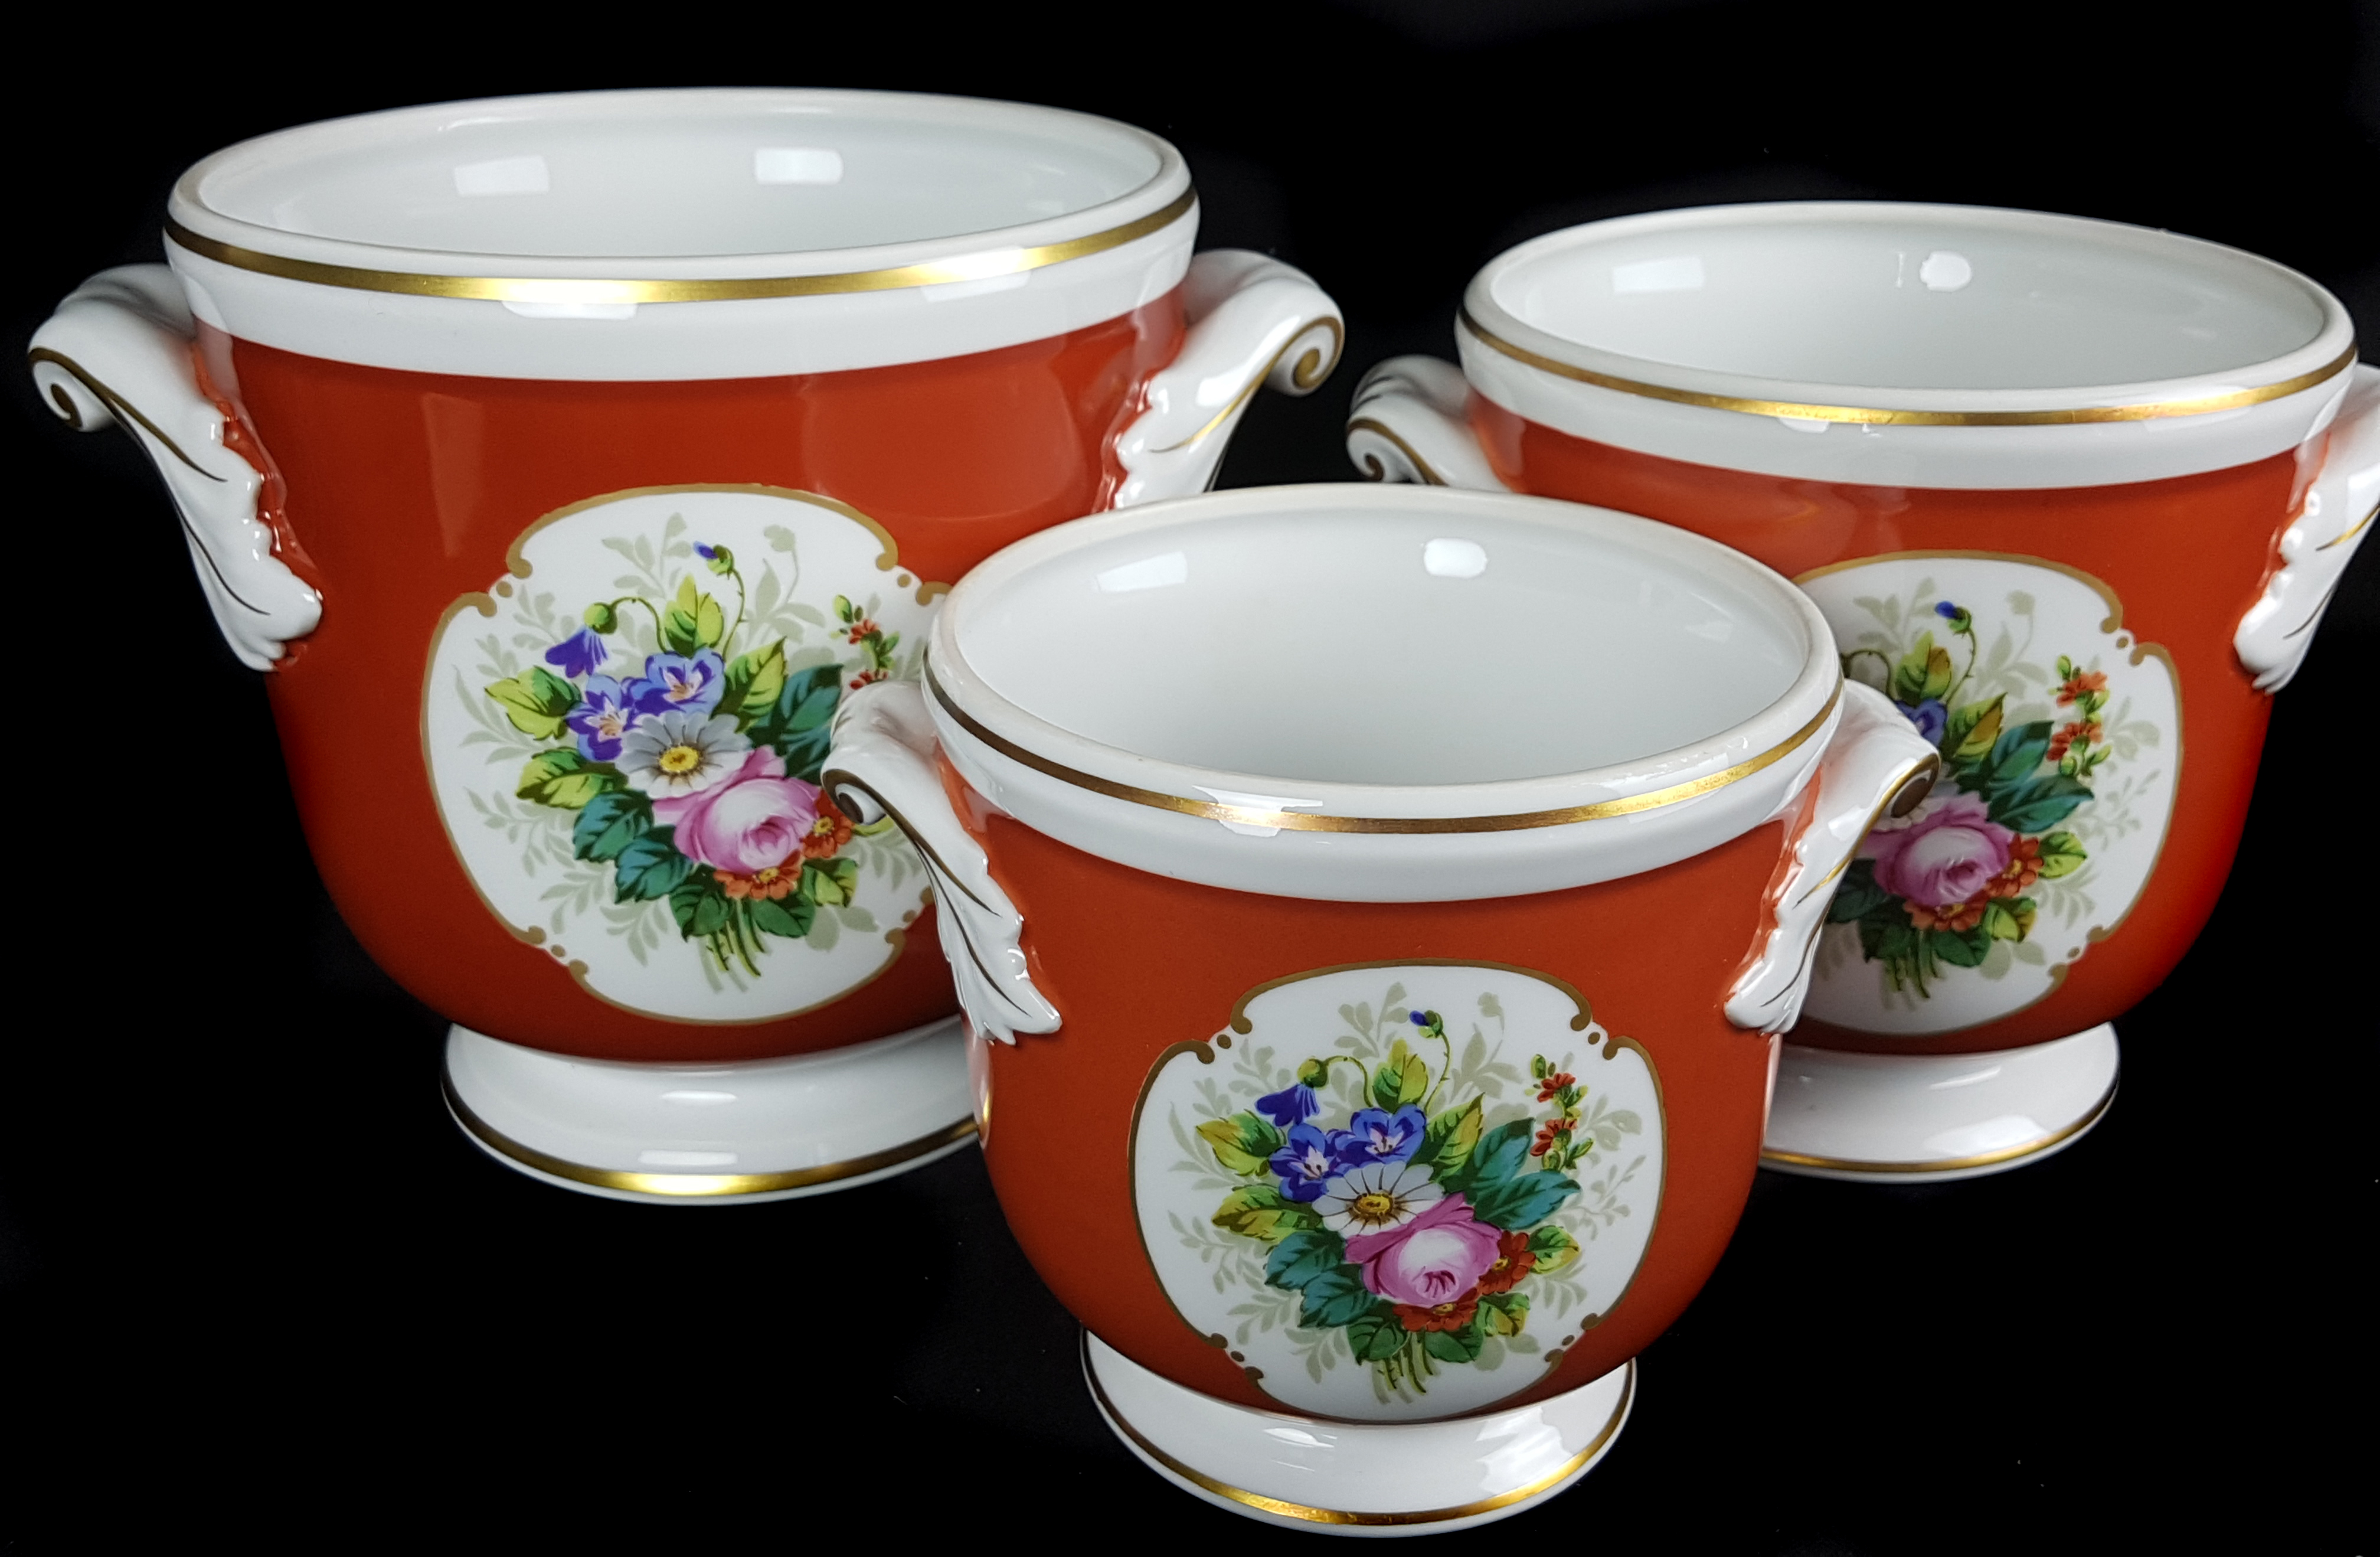 A graduated set of three Vista Alegre porcelain cache pots, painted with reserves of summer